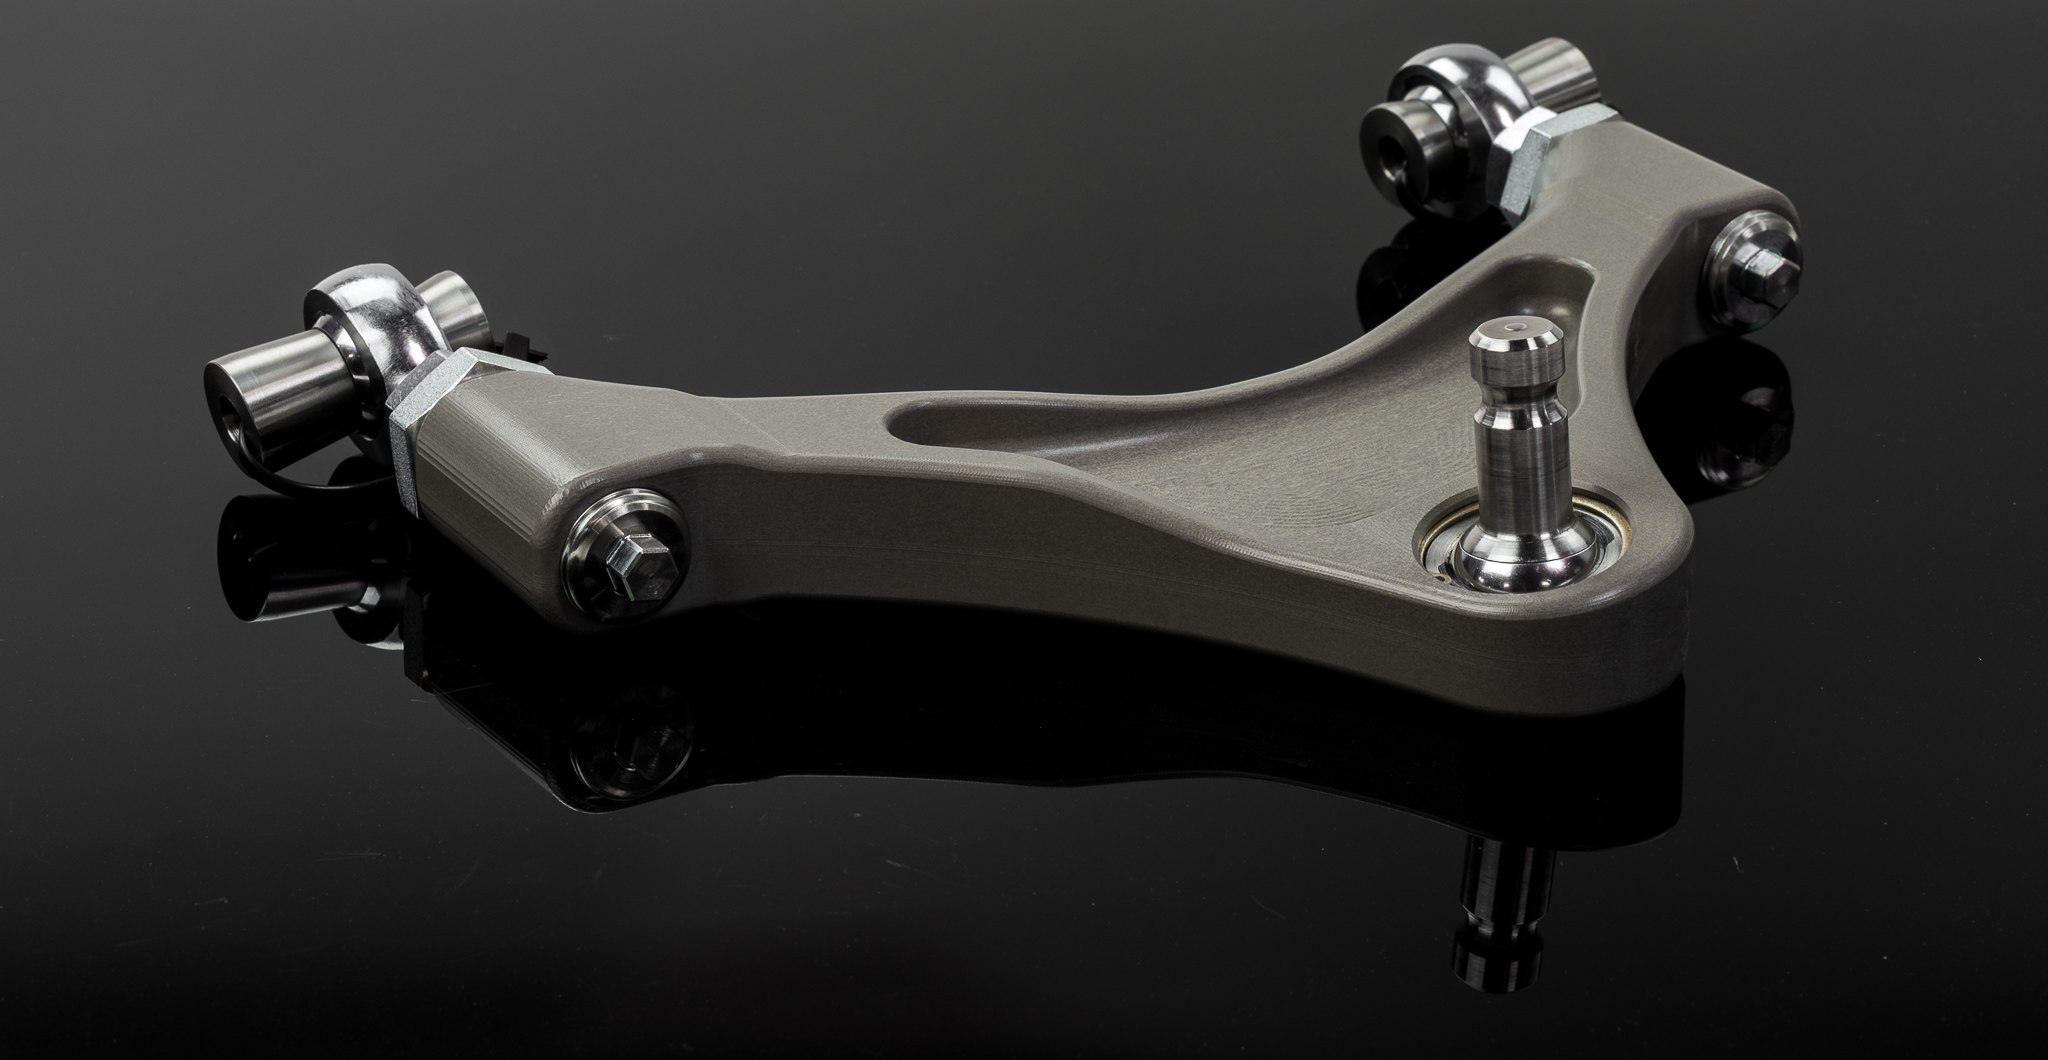 Voodoo13 Q50/G37 Front Camber/Caster Arms - Voodoo13 - Made in the USA,  suspension for street, drift and road racing